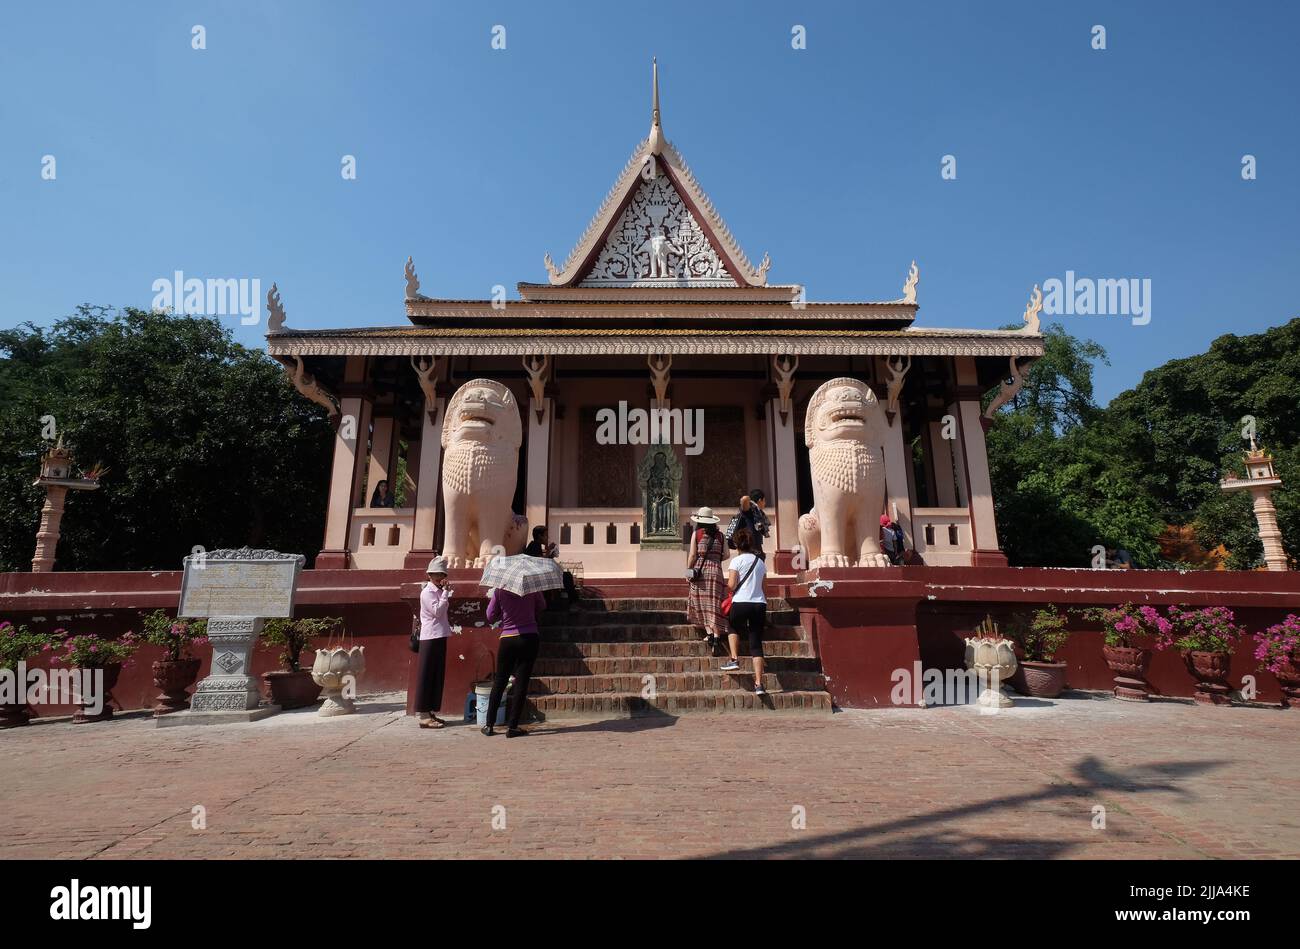 Tourists climb the stairs to enter the Wat Phnom Hill Buddhist temple, a pagoda in the capital city of Phnom Penh, Cambodia. Stock Photo